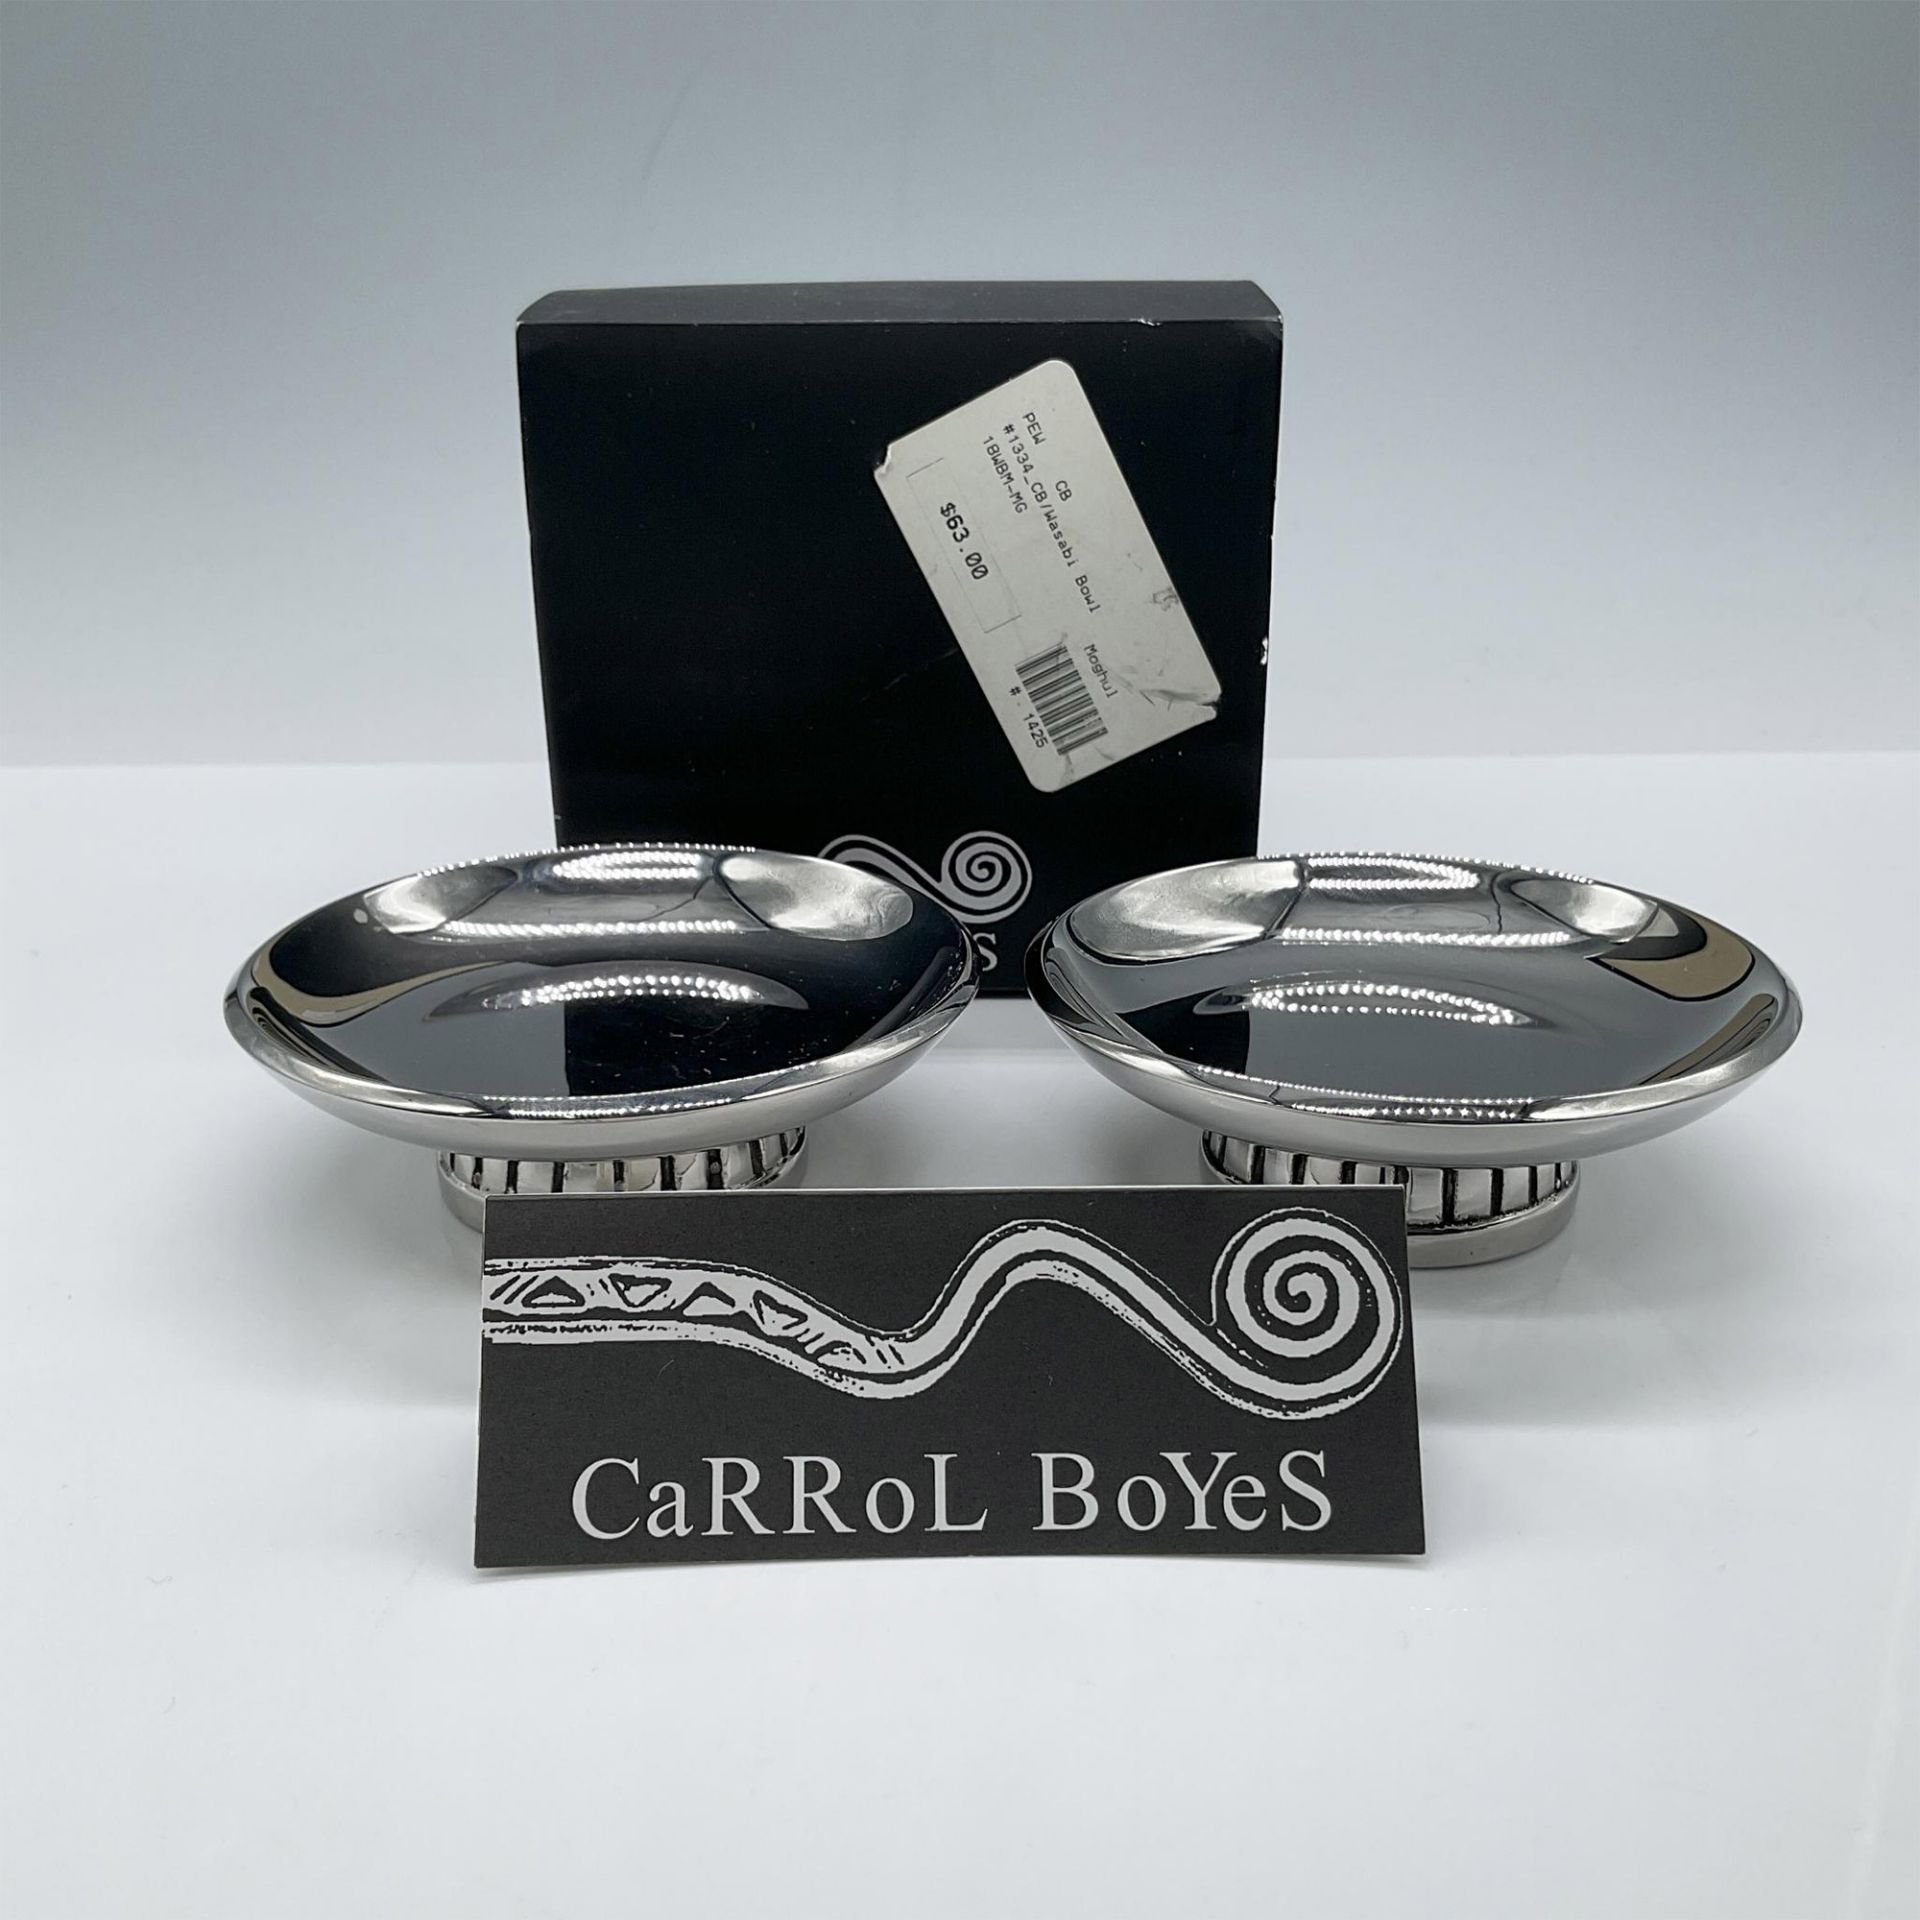 Pair of Carrol Boyes Stainless Steel Wasabi Bowls 18/8 - Image 4 of 5